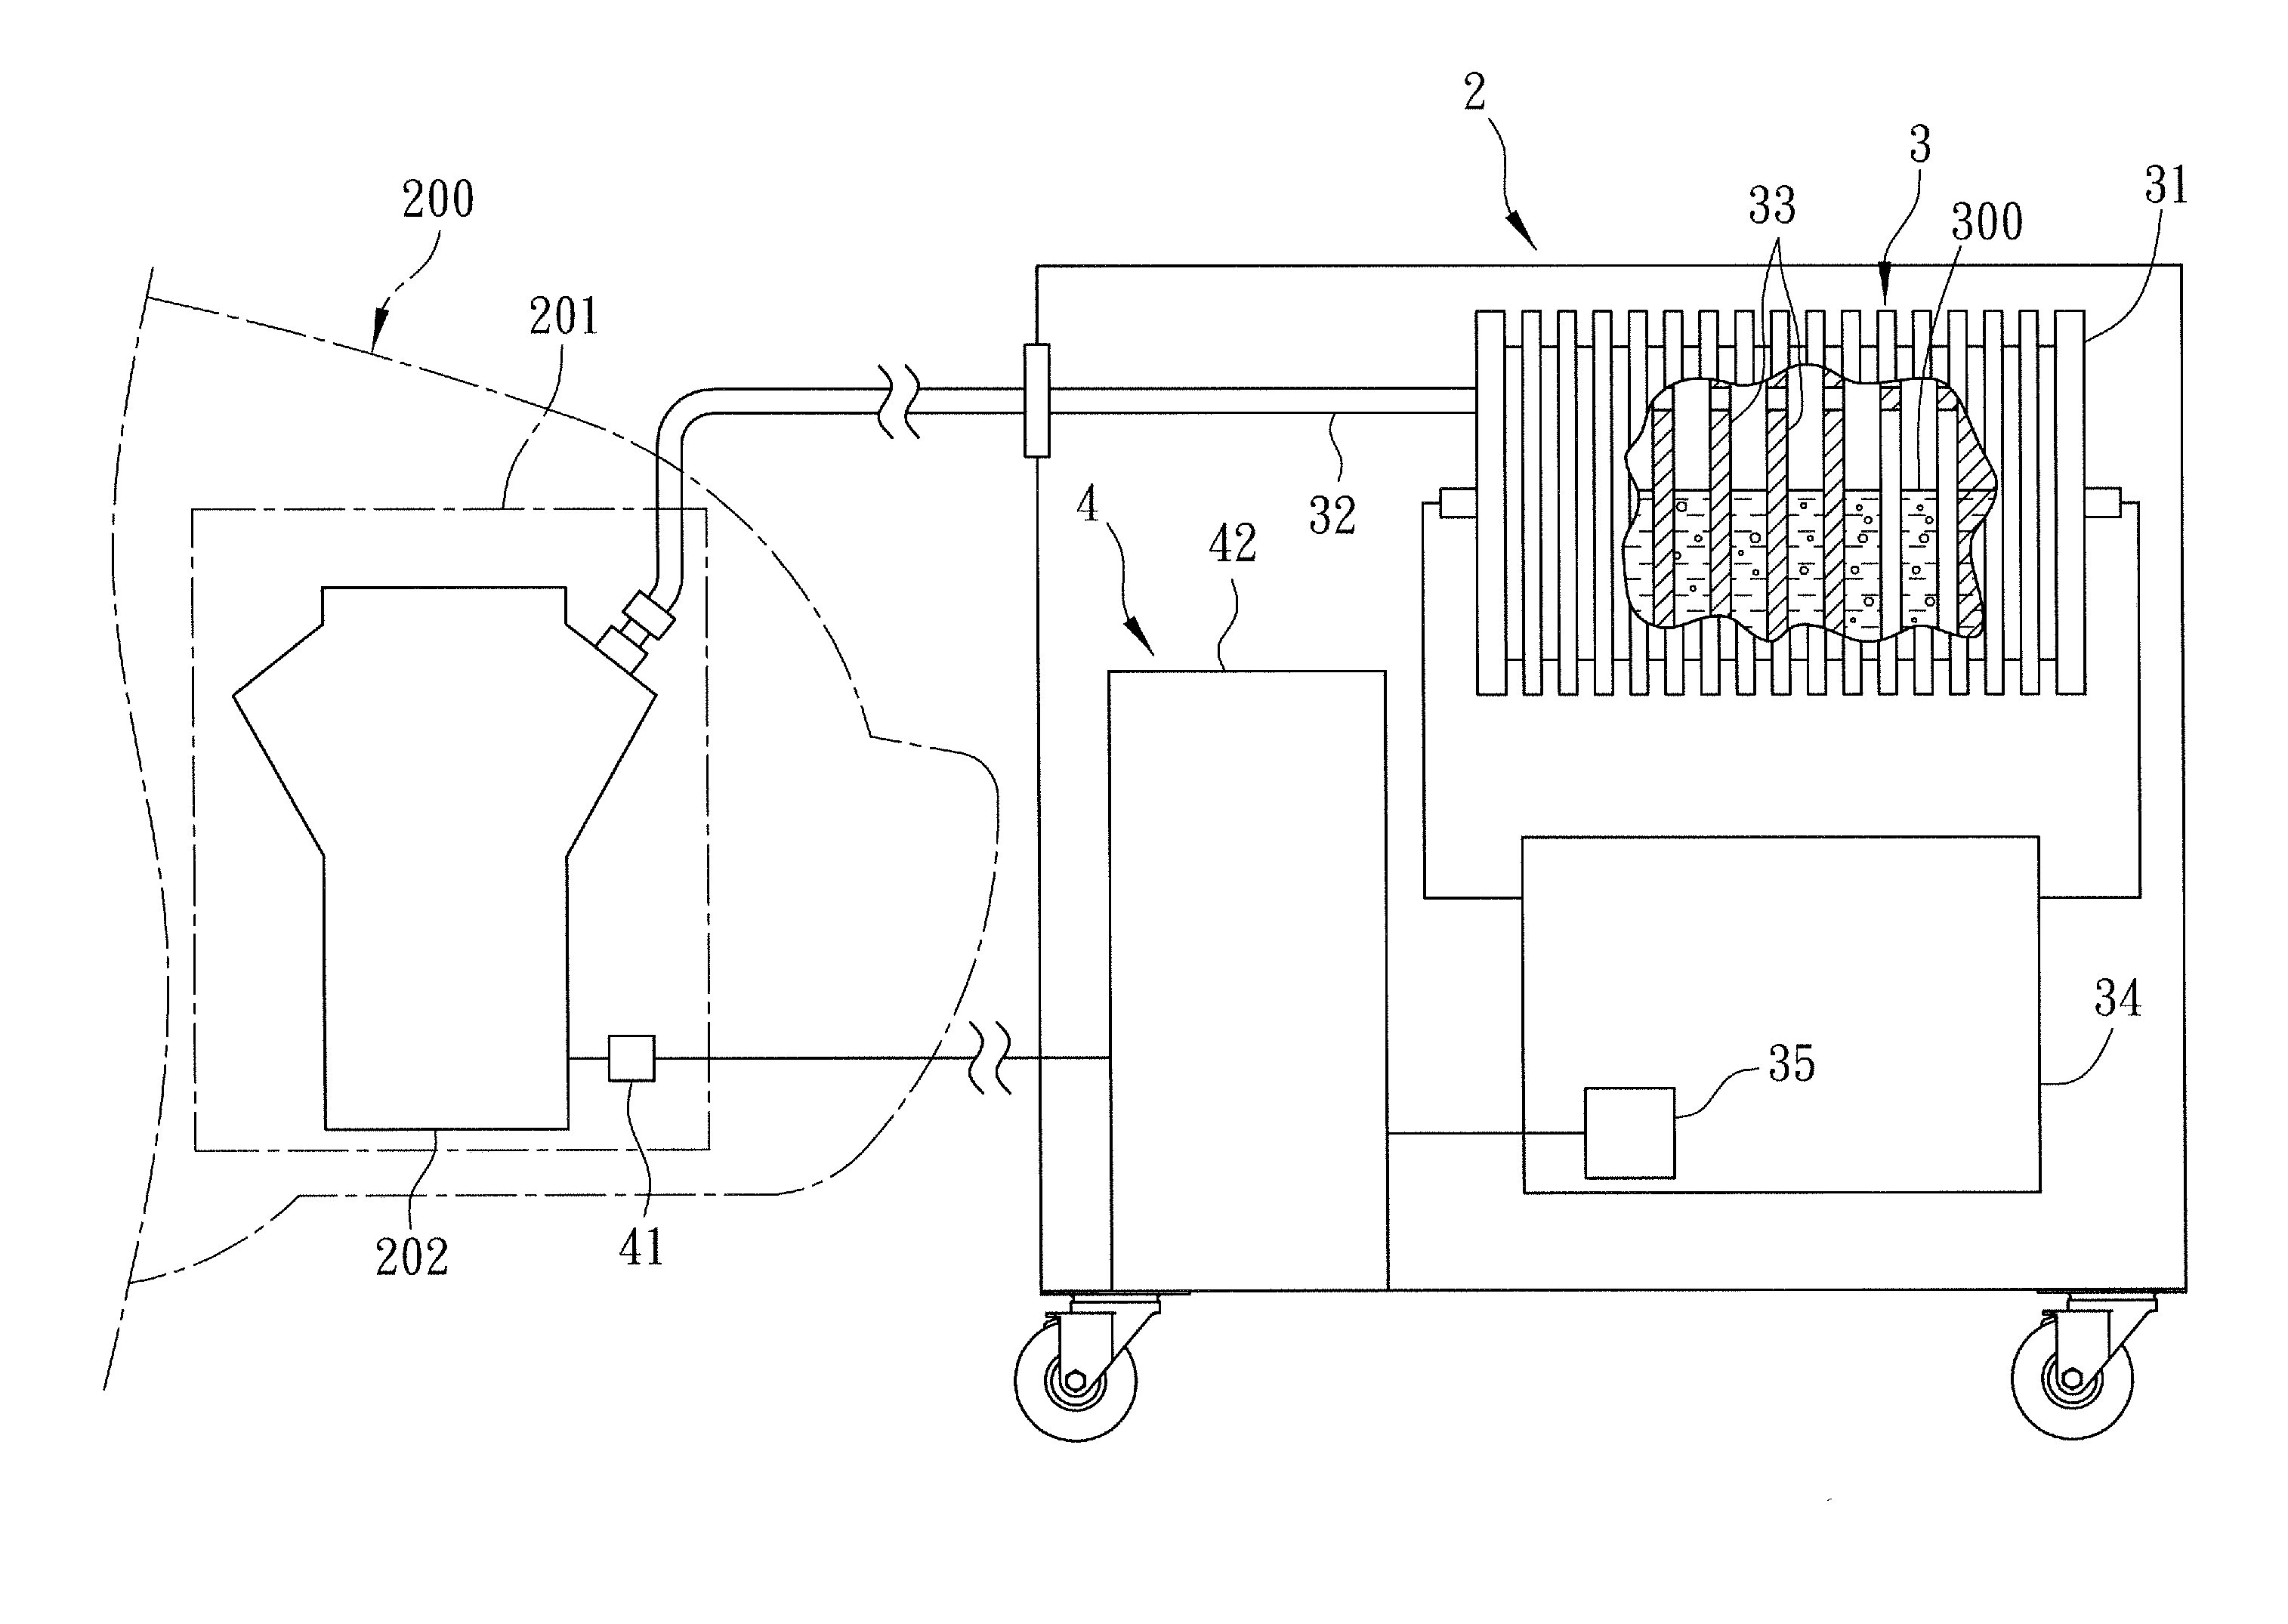 Carbon buildup removal device with protection function of vibration detection